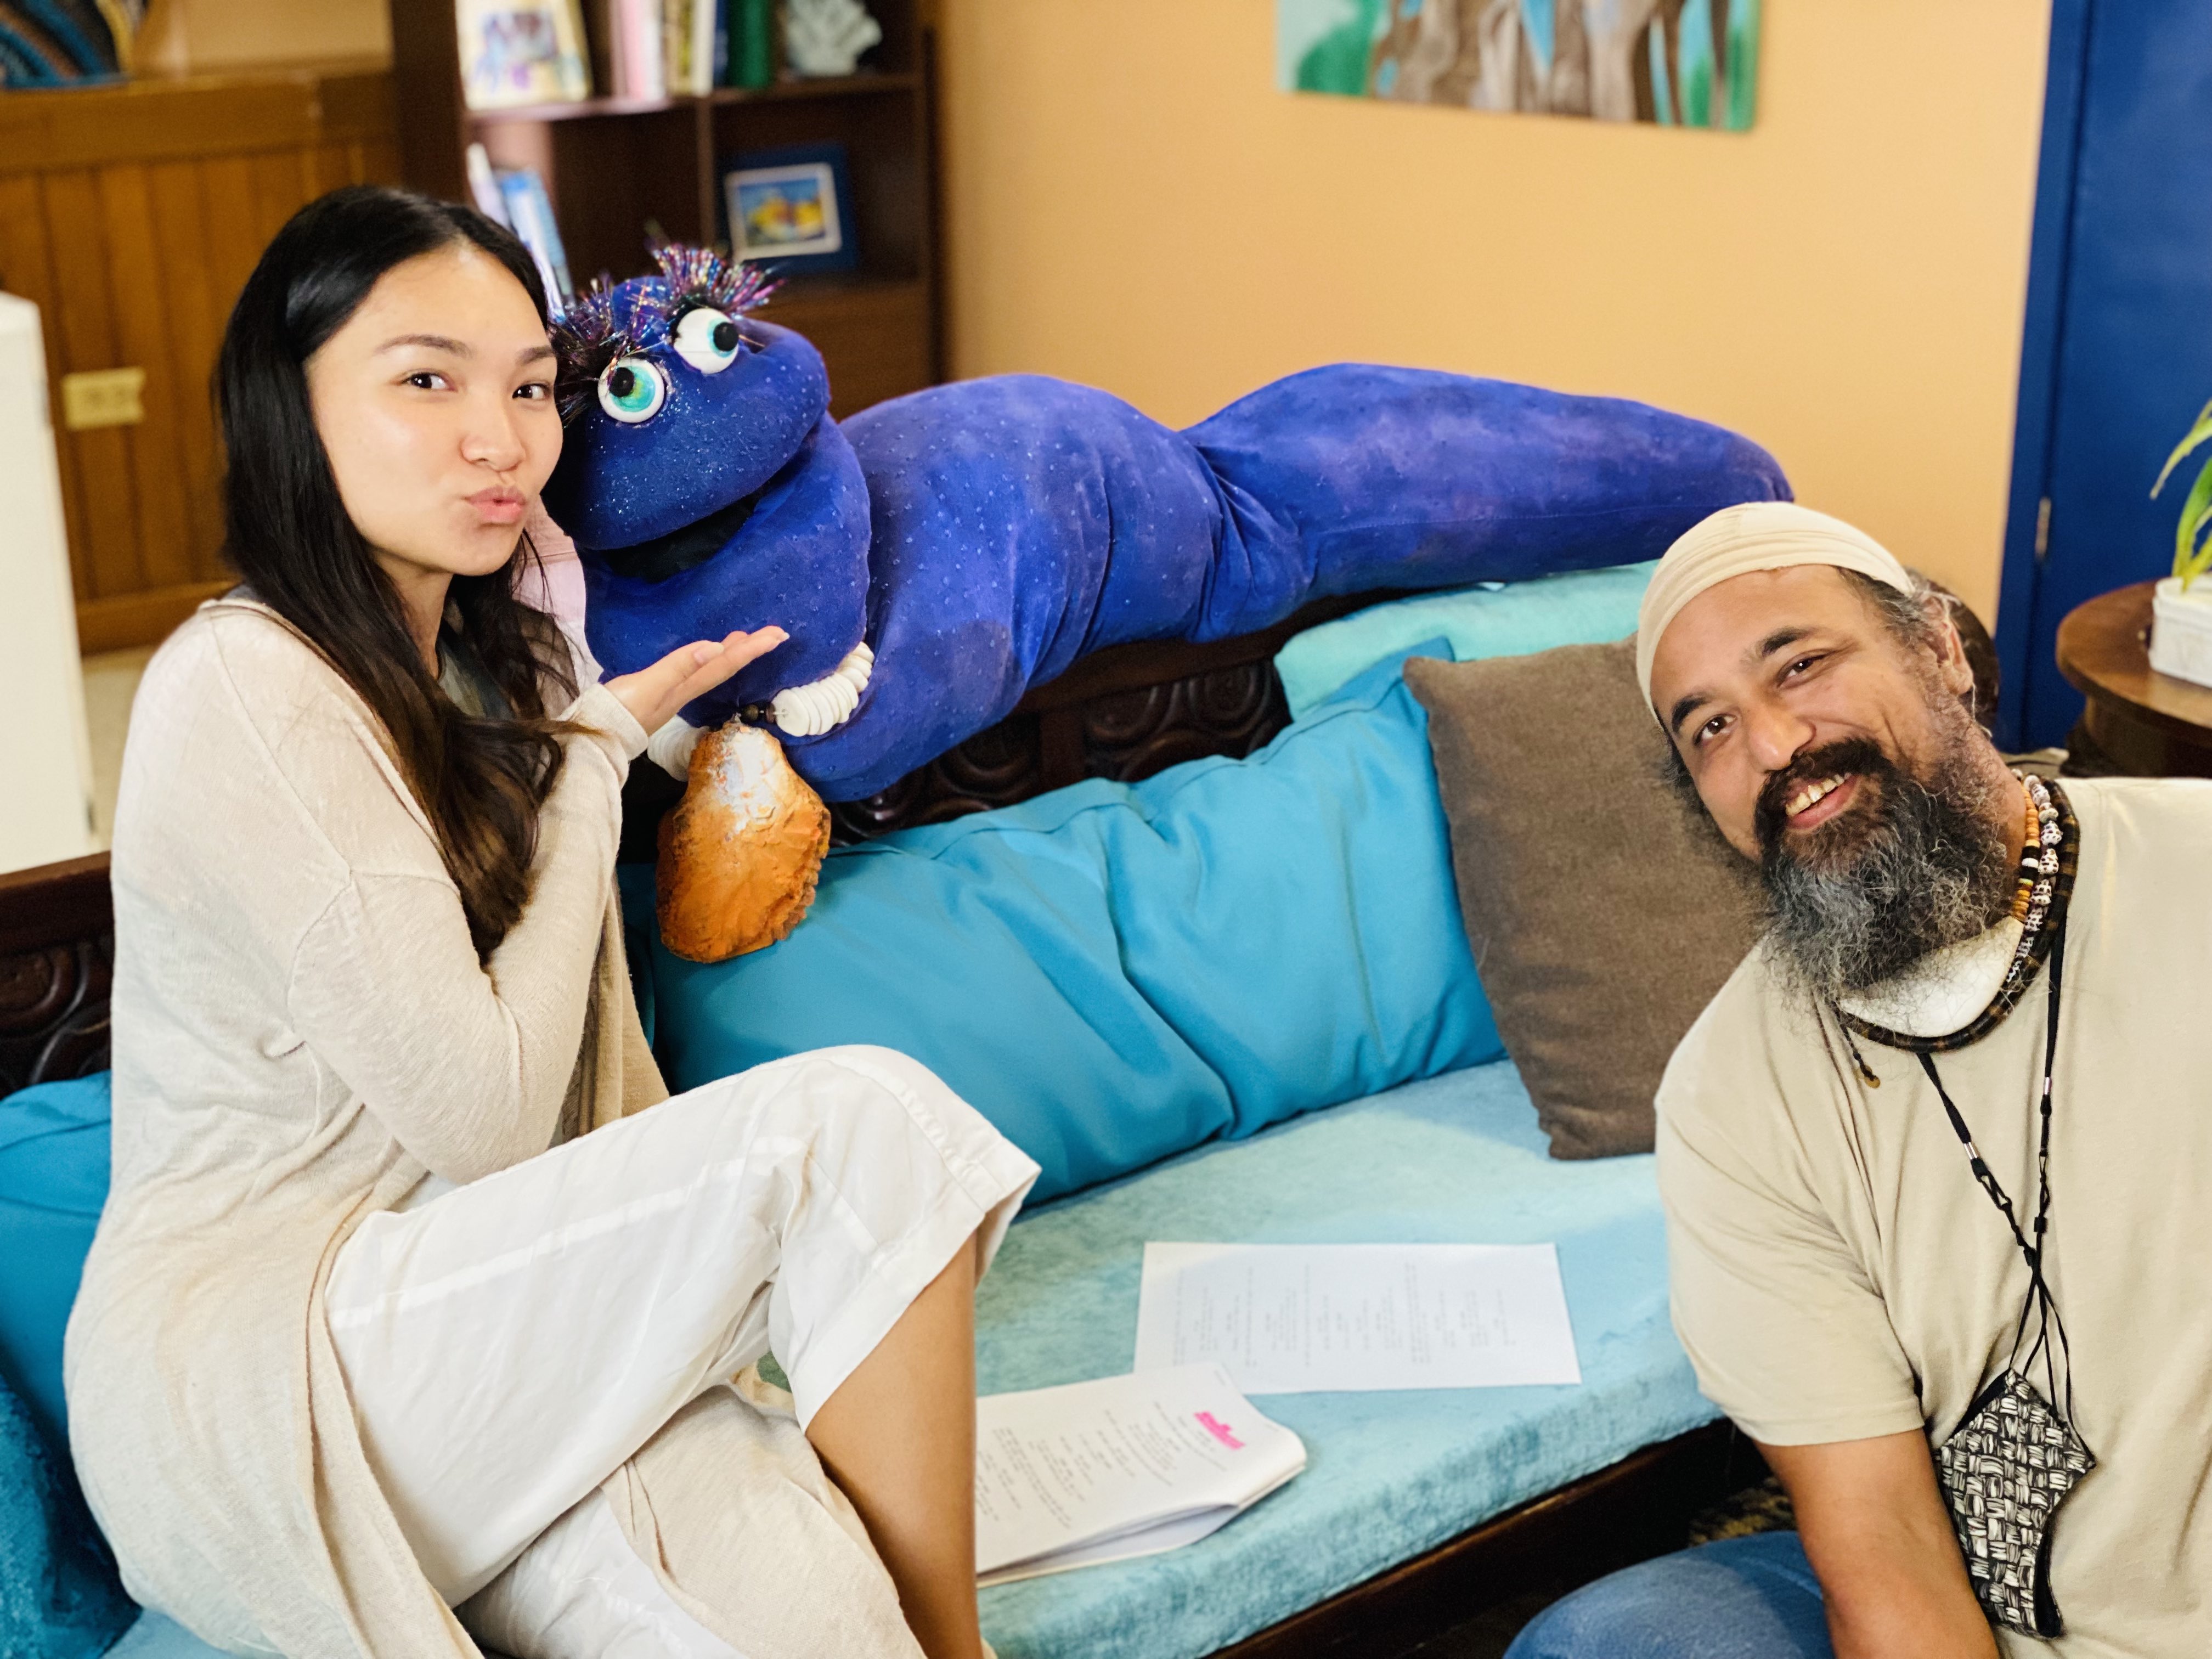 A young girl with long, dark hair sits on a light blue sofa next to a large, sparkly indigo-colored dudus balati, and a bearded man in a white cap and beige shirt sitting on the floor.